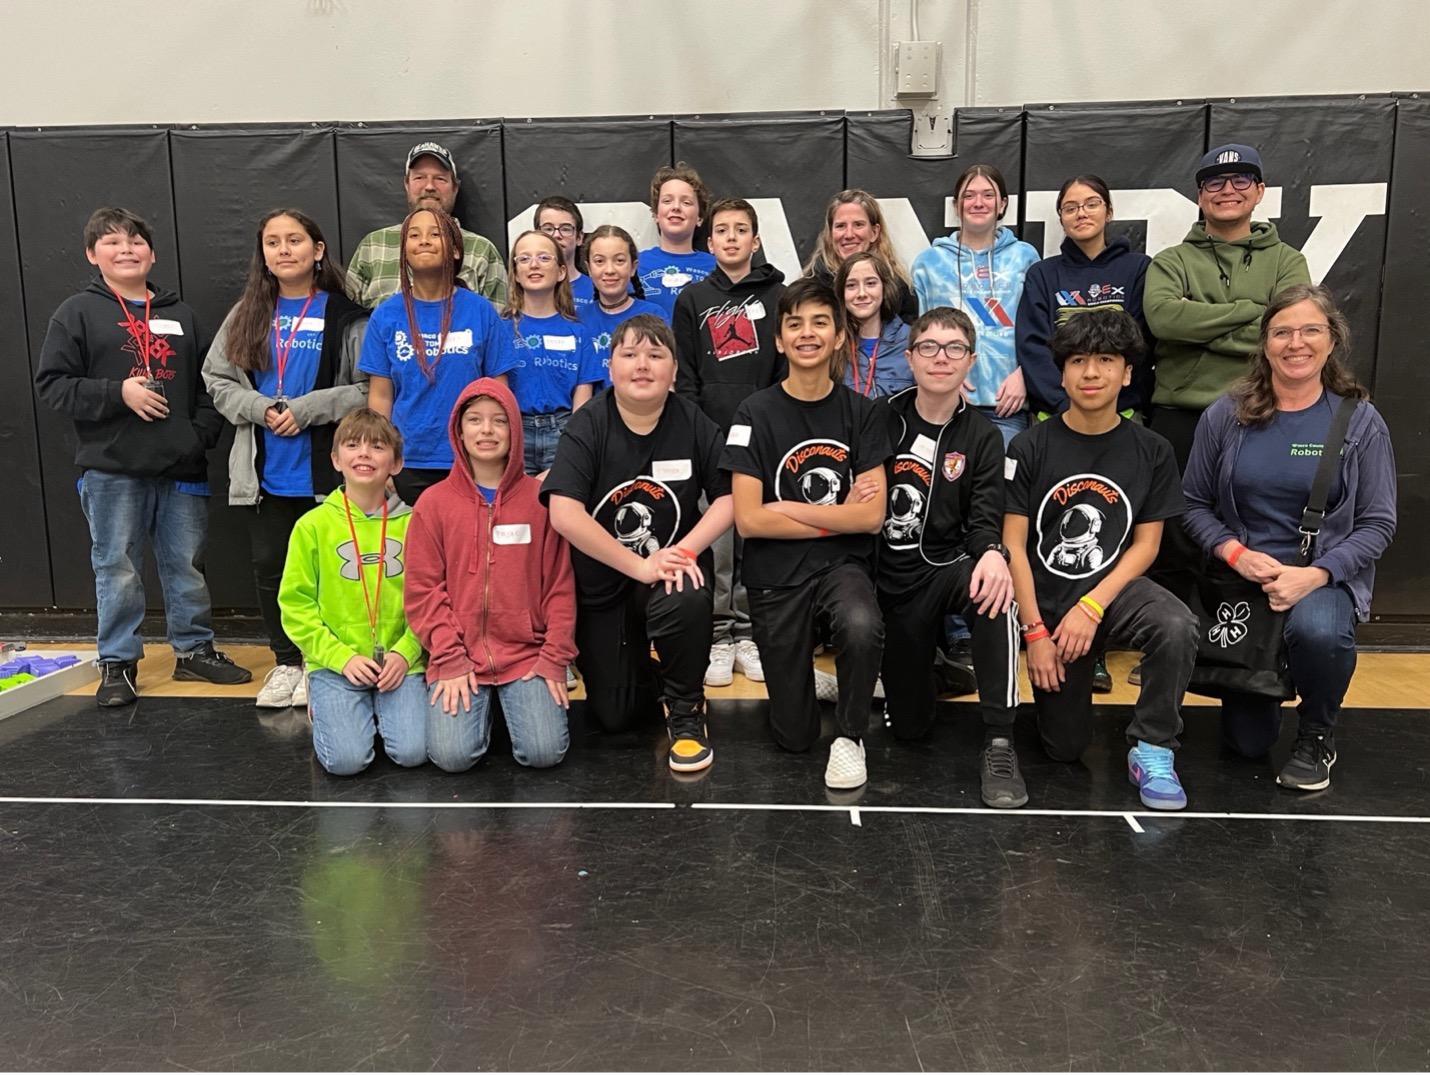 Wasco County 4-H Robotics team members pose for a group photo at the VEX IQ Robotics Oregon State Championship with teen mentors and Lu Seapy.